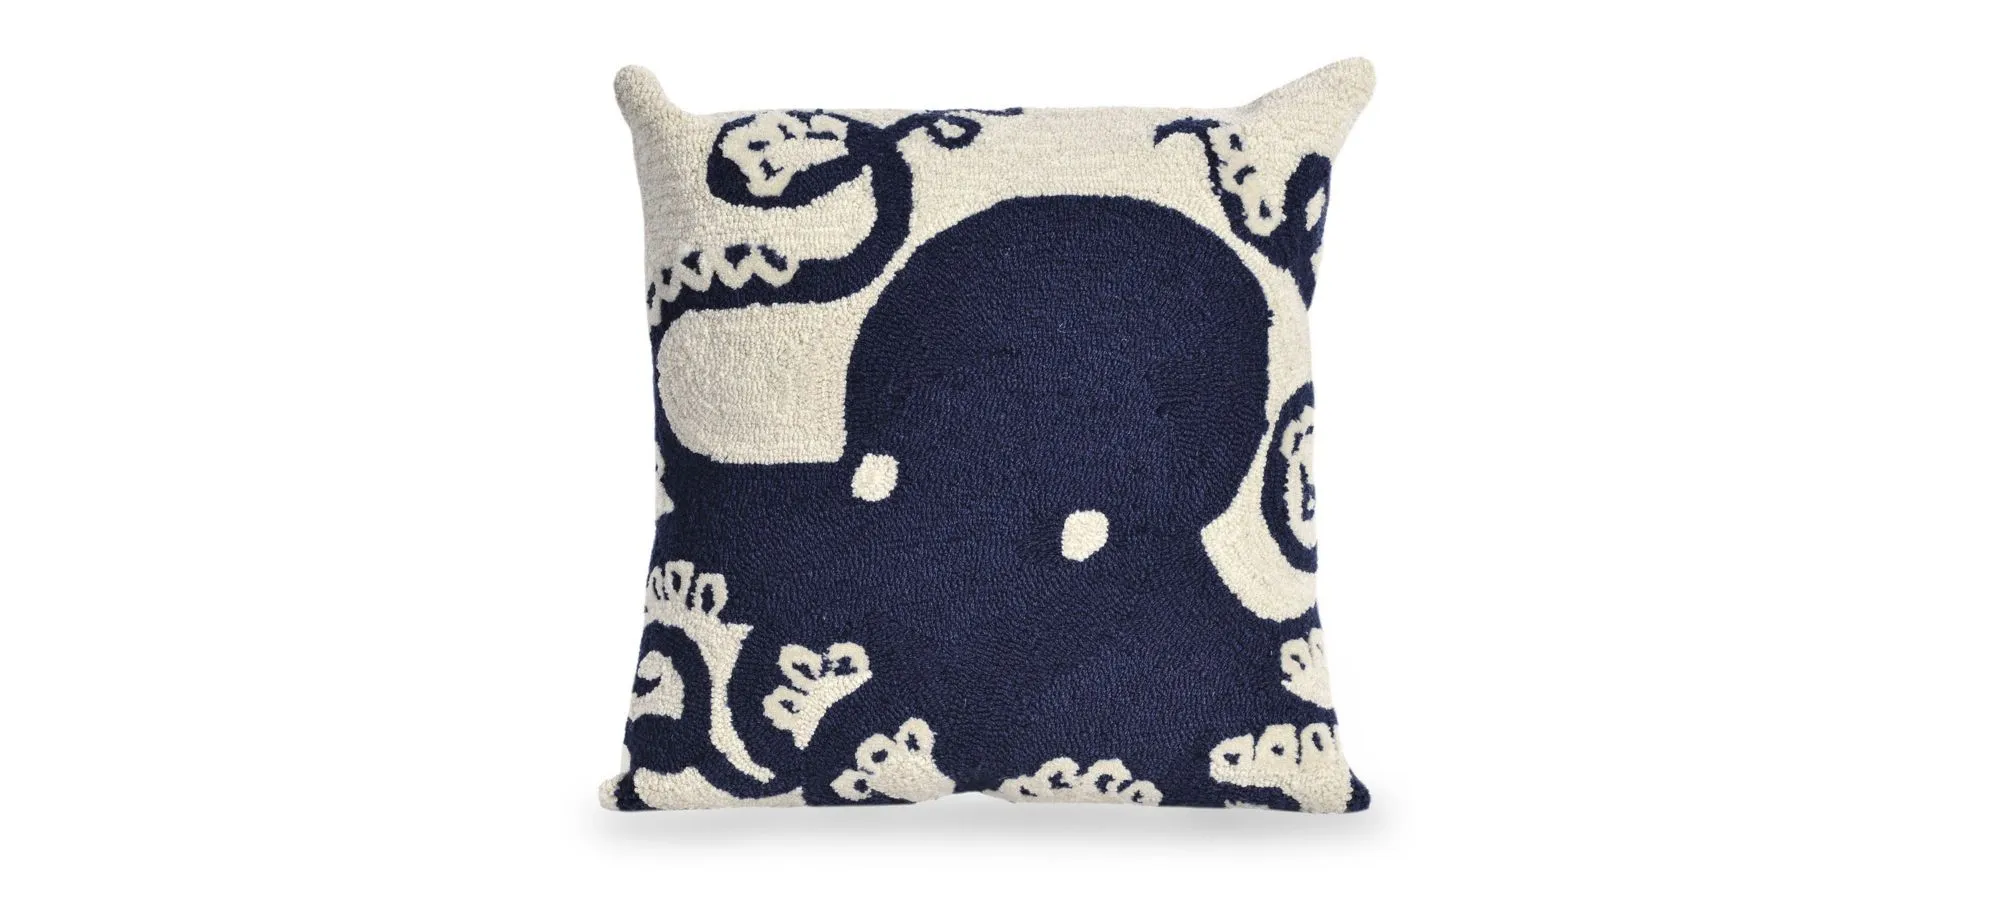 Liora Manne Frontporch Octopus Pillow in Navy by Trans-Ocean Import Co Inc